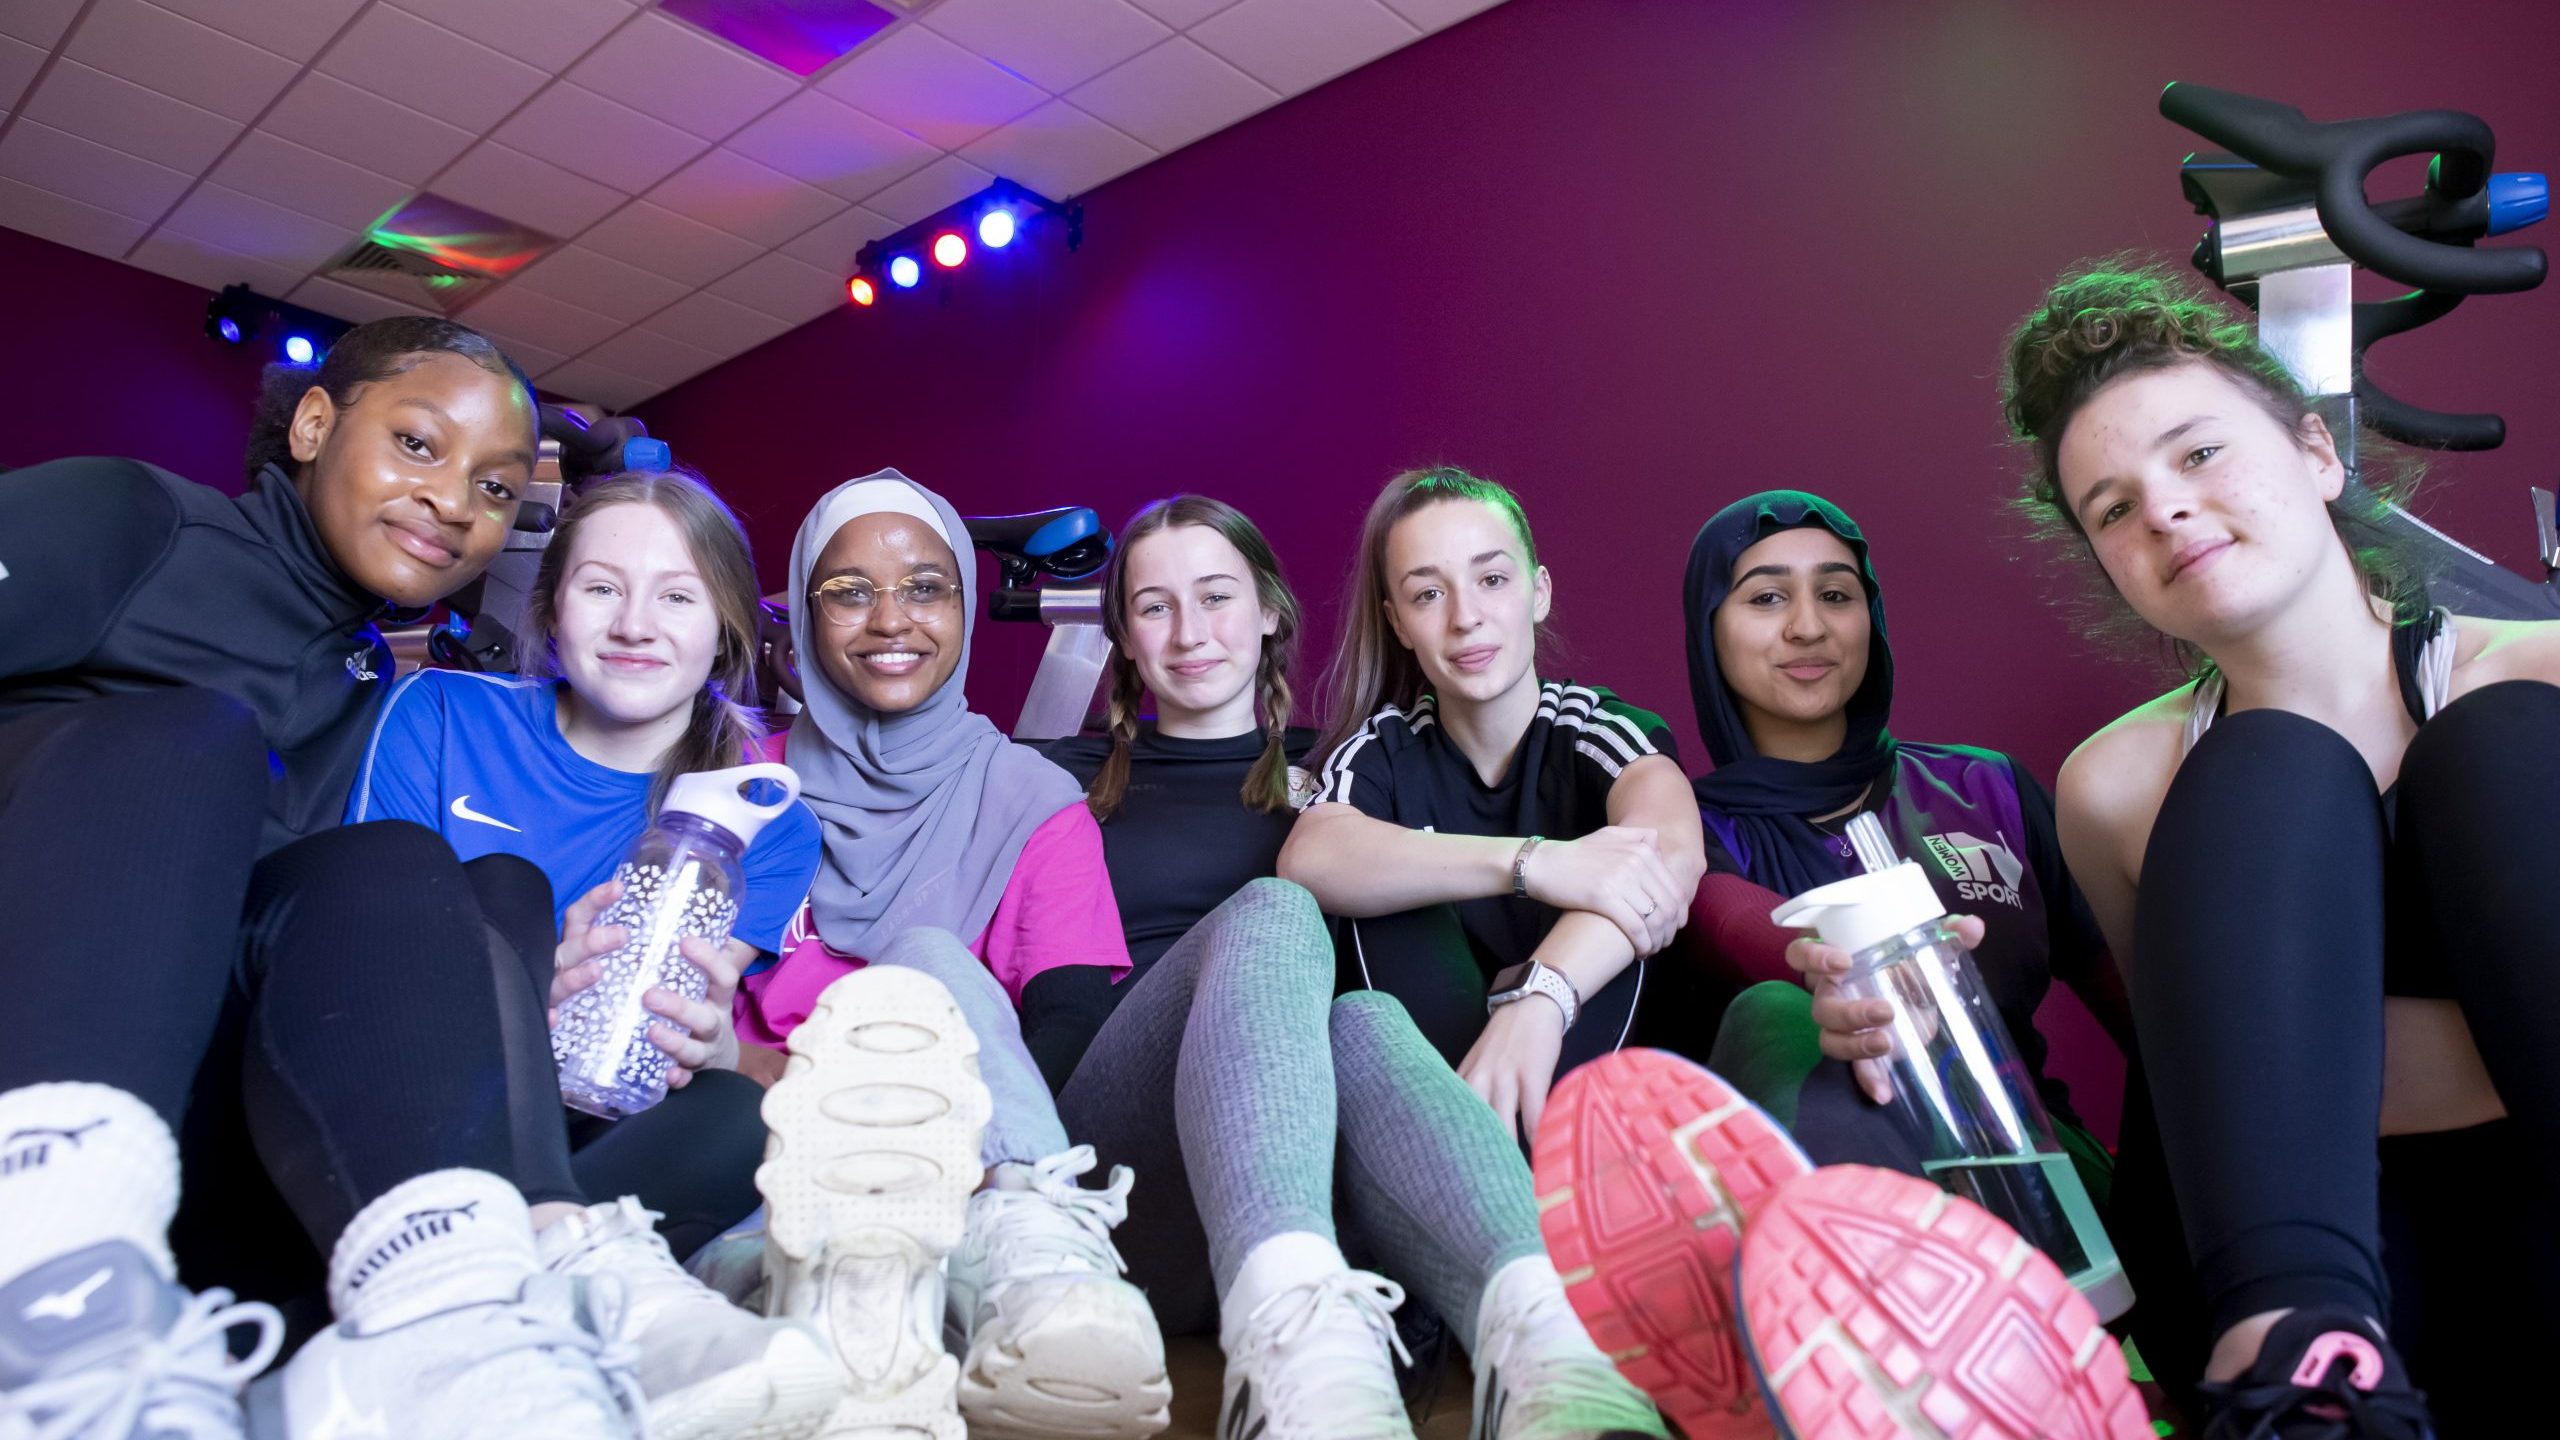 A group of girls sitting together in a leisure centre, smiling